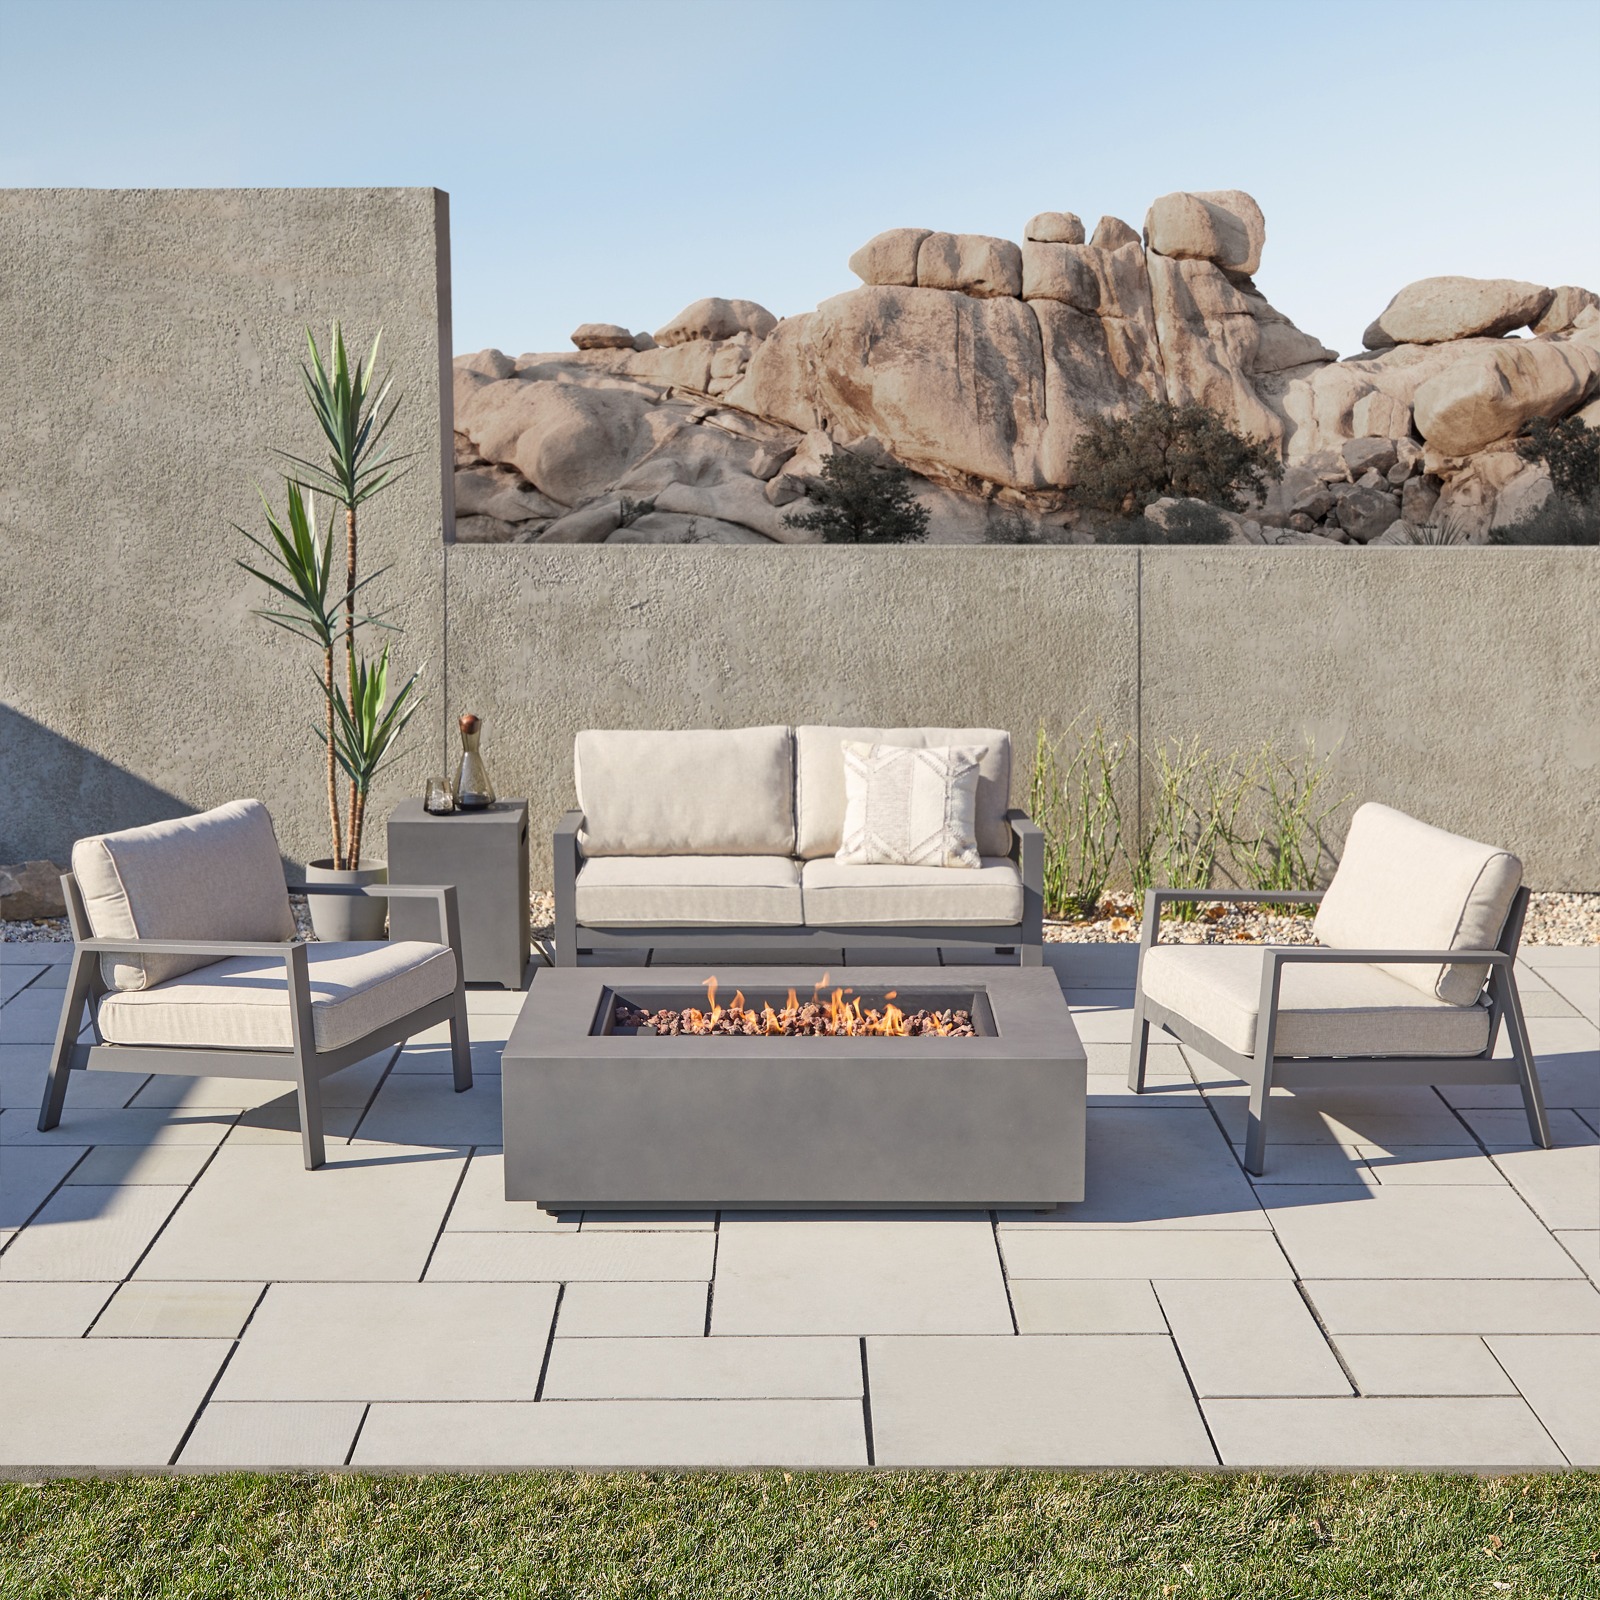 Aegean Patio Furniture Fire Table Fire Pit Patio Collection